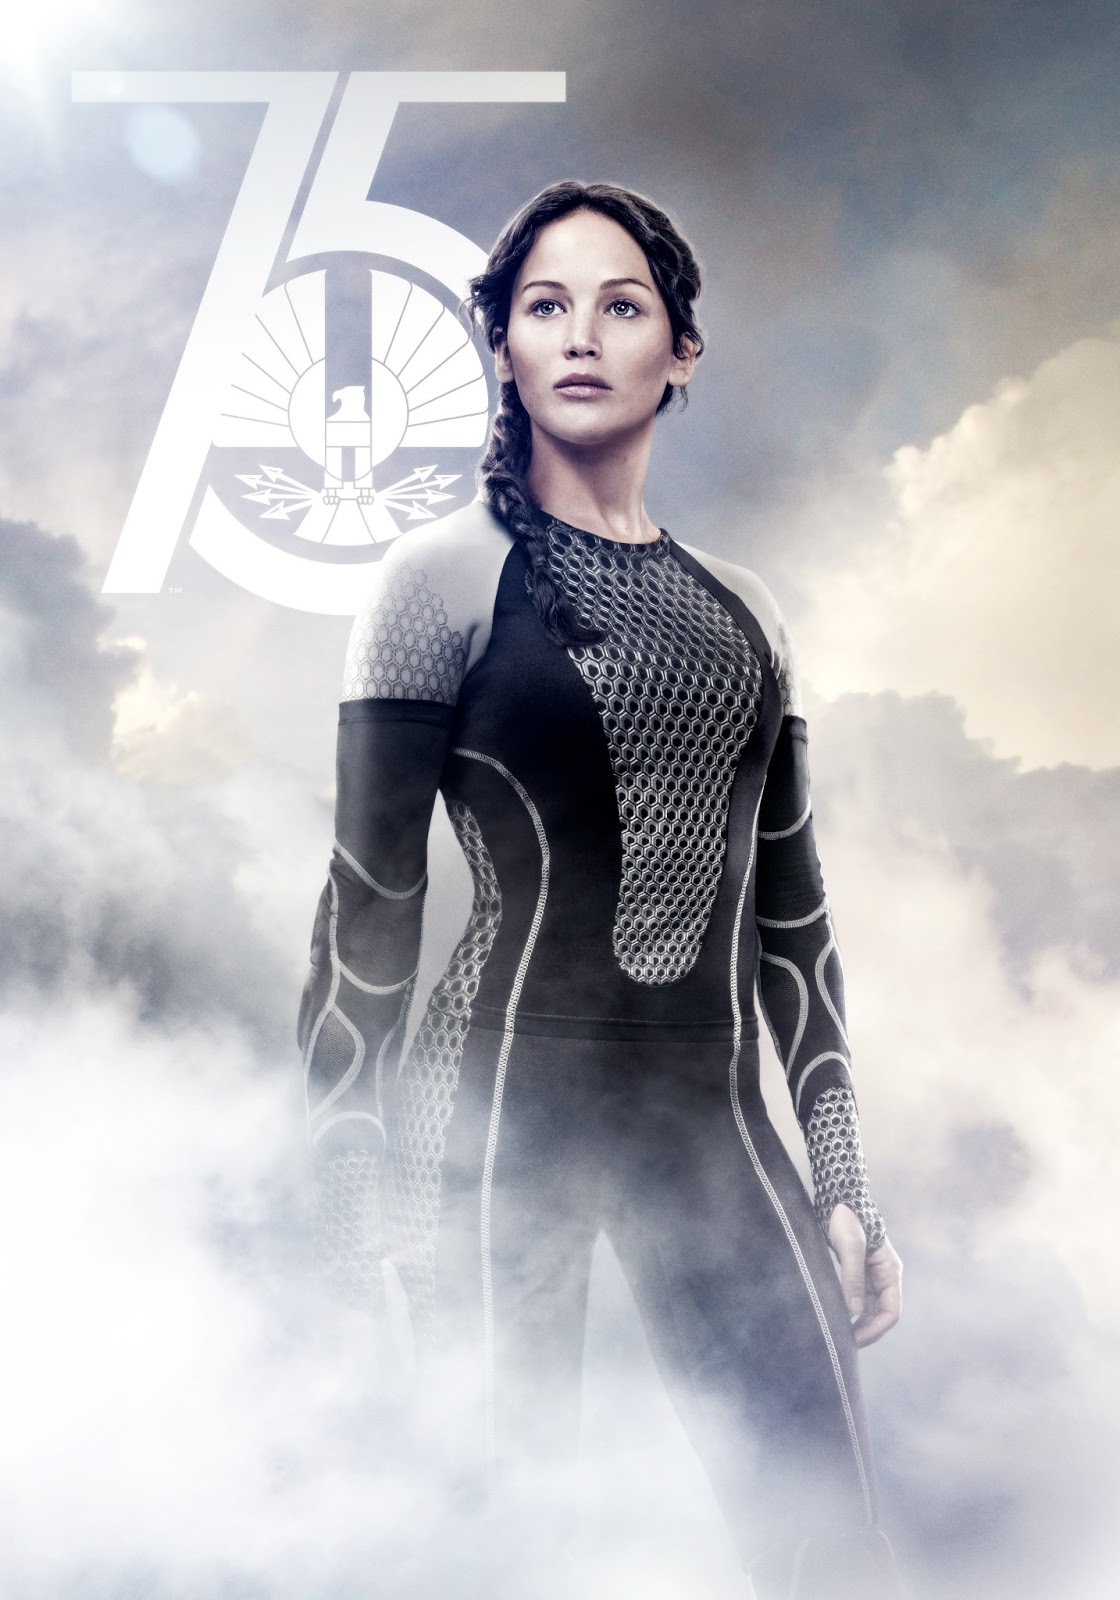 Textless Movies: THE HUNGER GAMES: CATCHING FIRE | textless posters